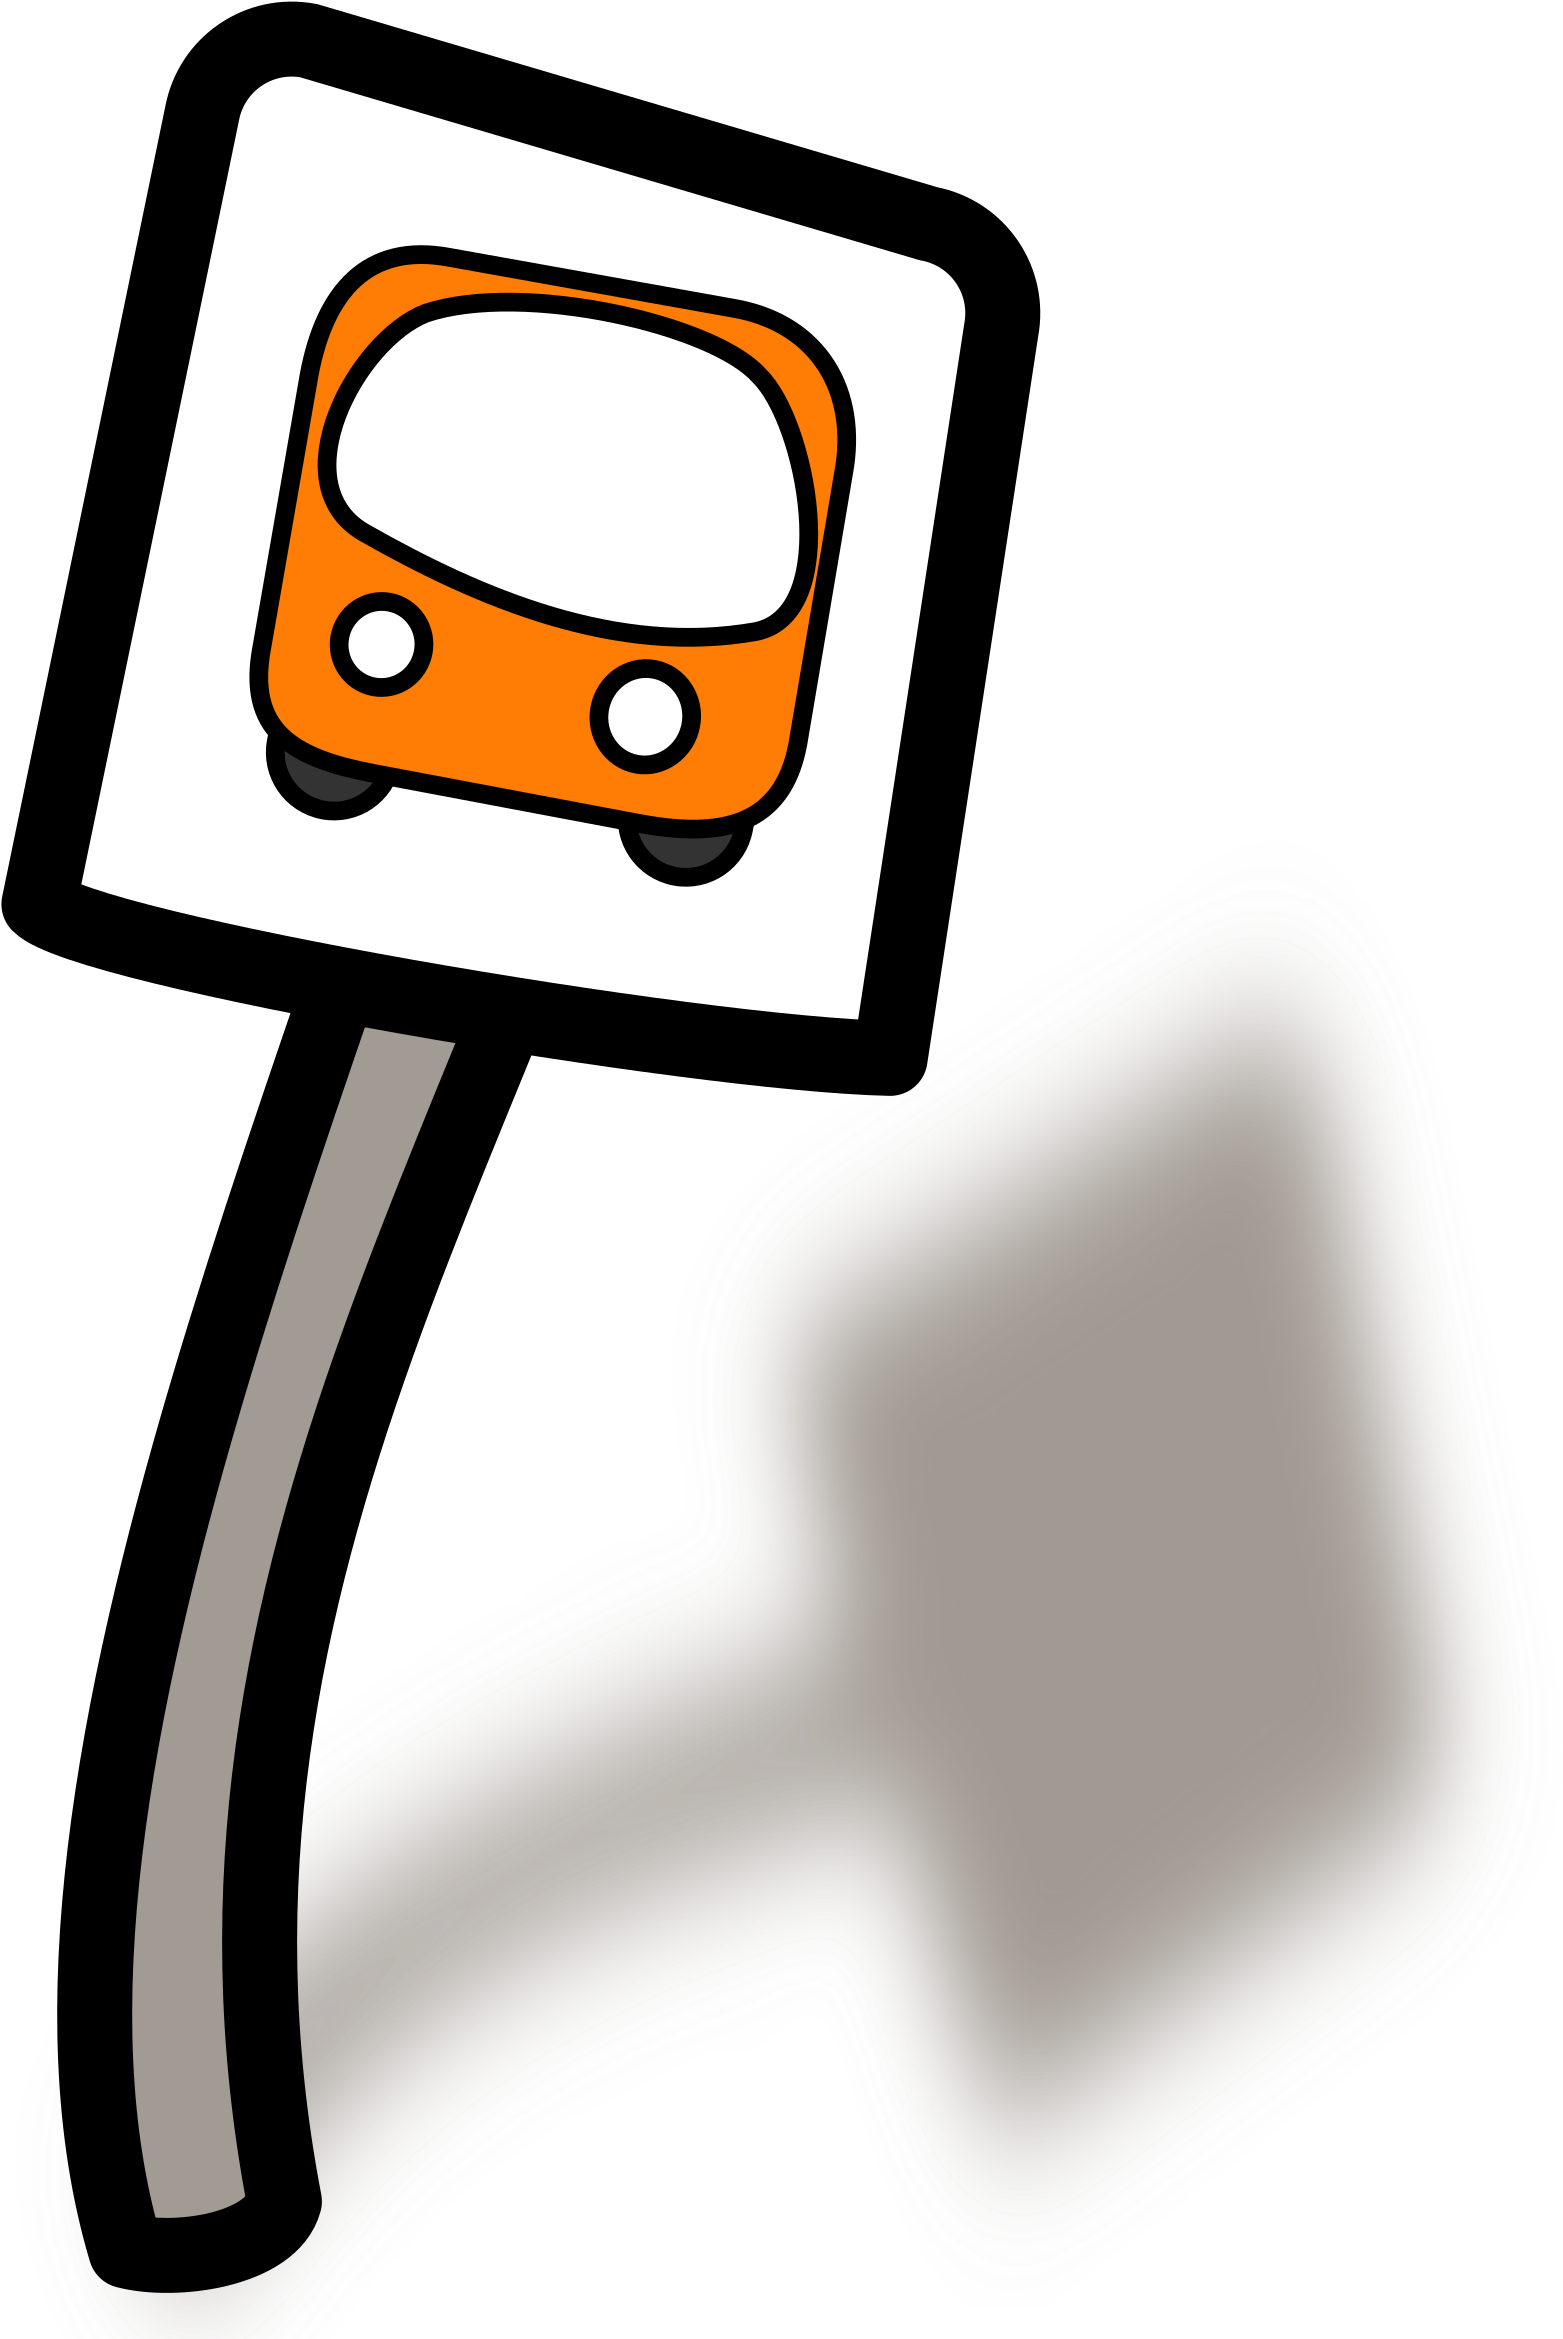 Clipart Of A Bus Stop Funny - Bus Stop Sign Clipart (2400x2400)